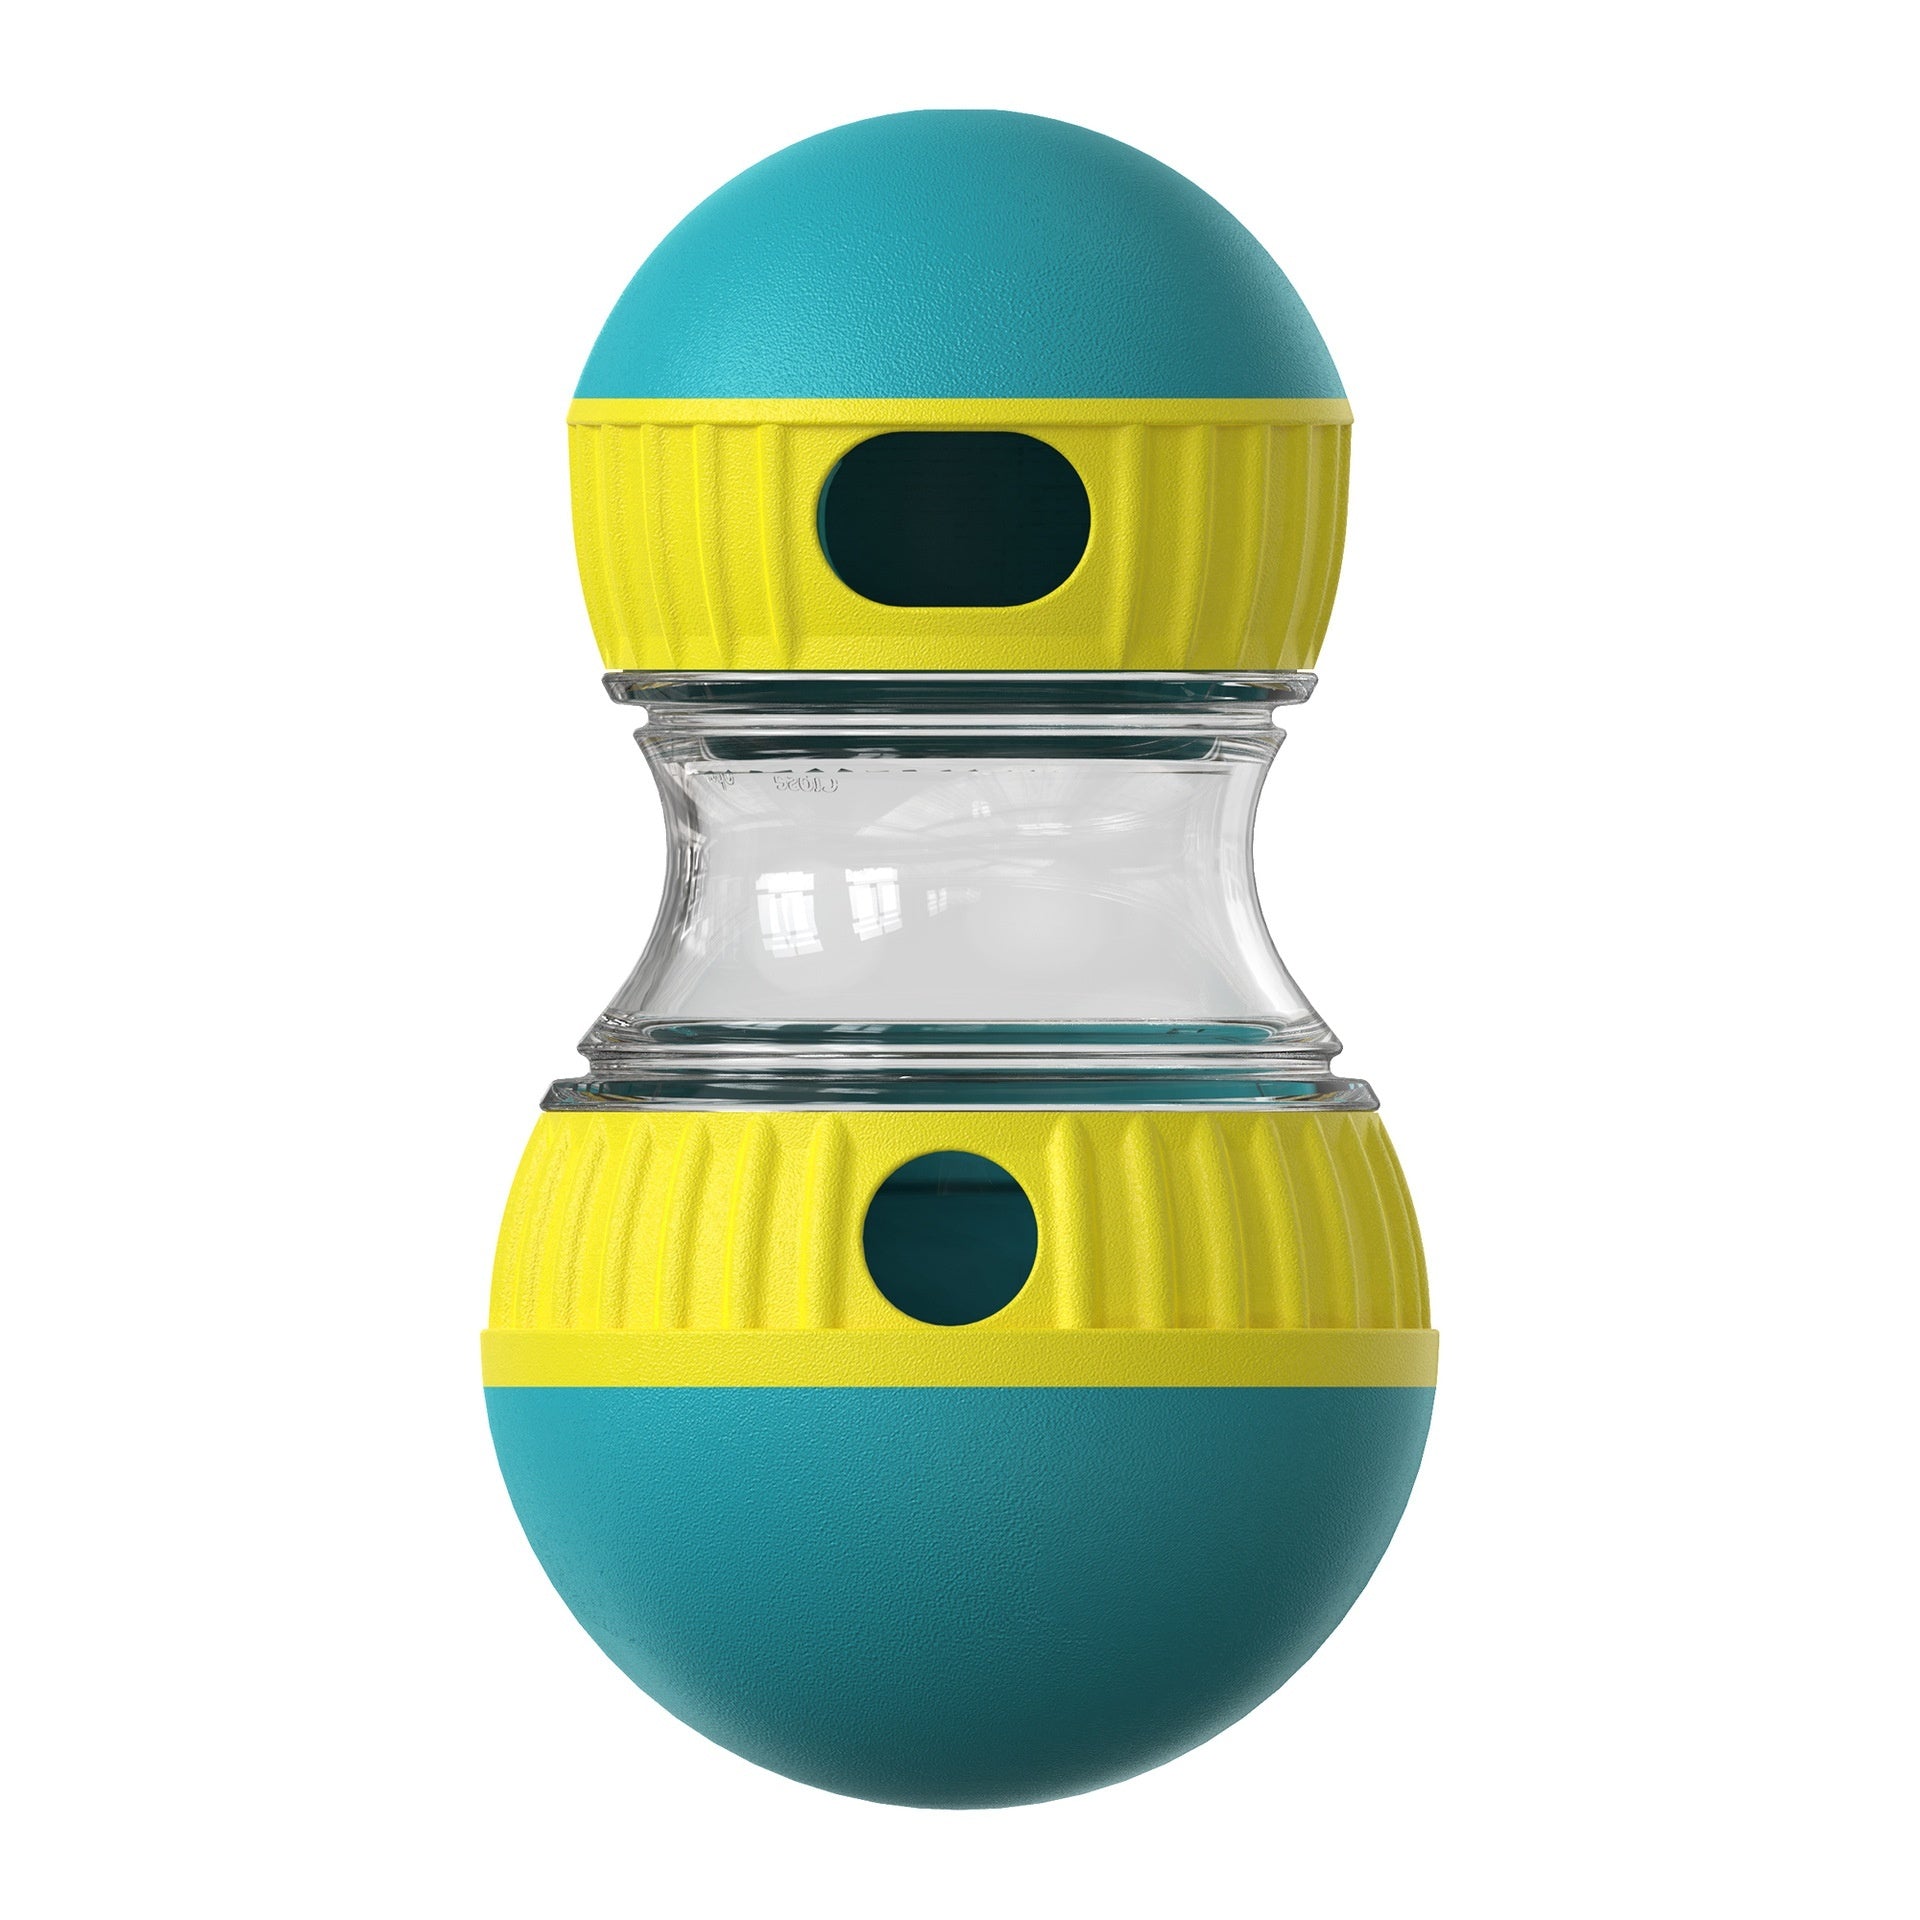 Food Dispensing Dog Toy Tumbler Leaky Food Ball Puzzle Toys Interactive Slowly Feeding Protect Stomach Increase Intelligence Pets Toy Pet Products - ZENICO